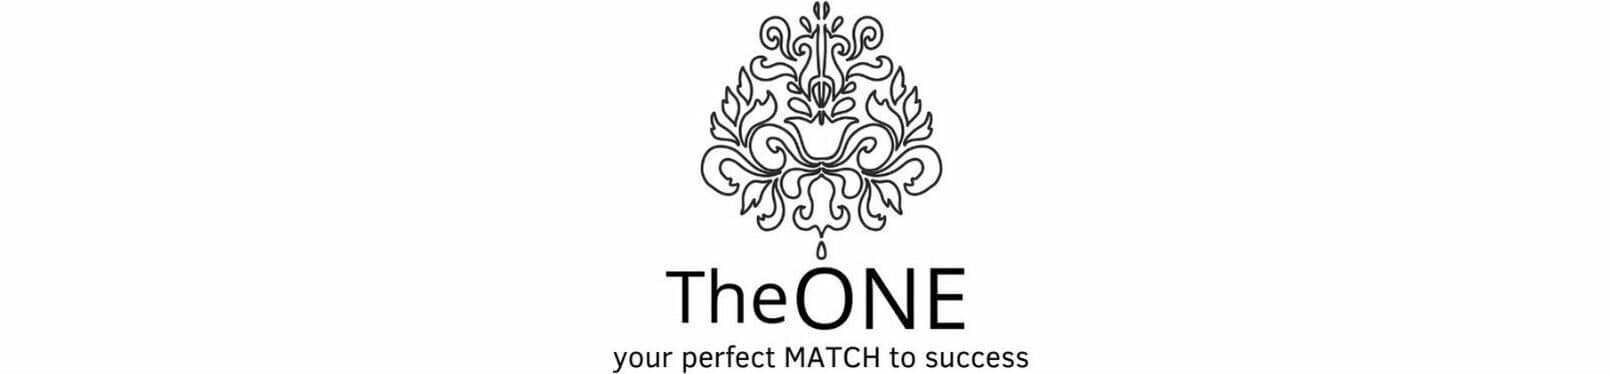 TheONE personal care Germany/Austria